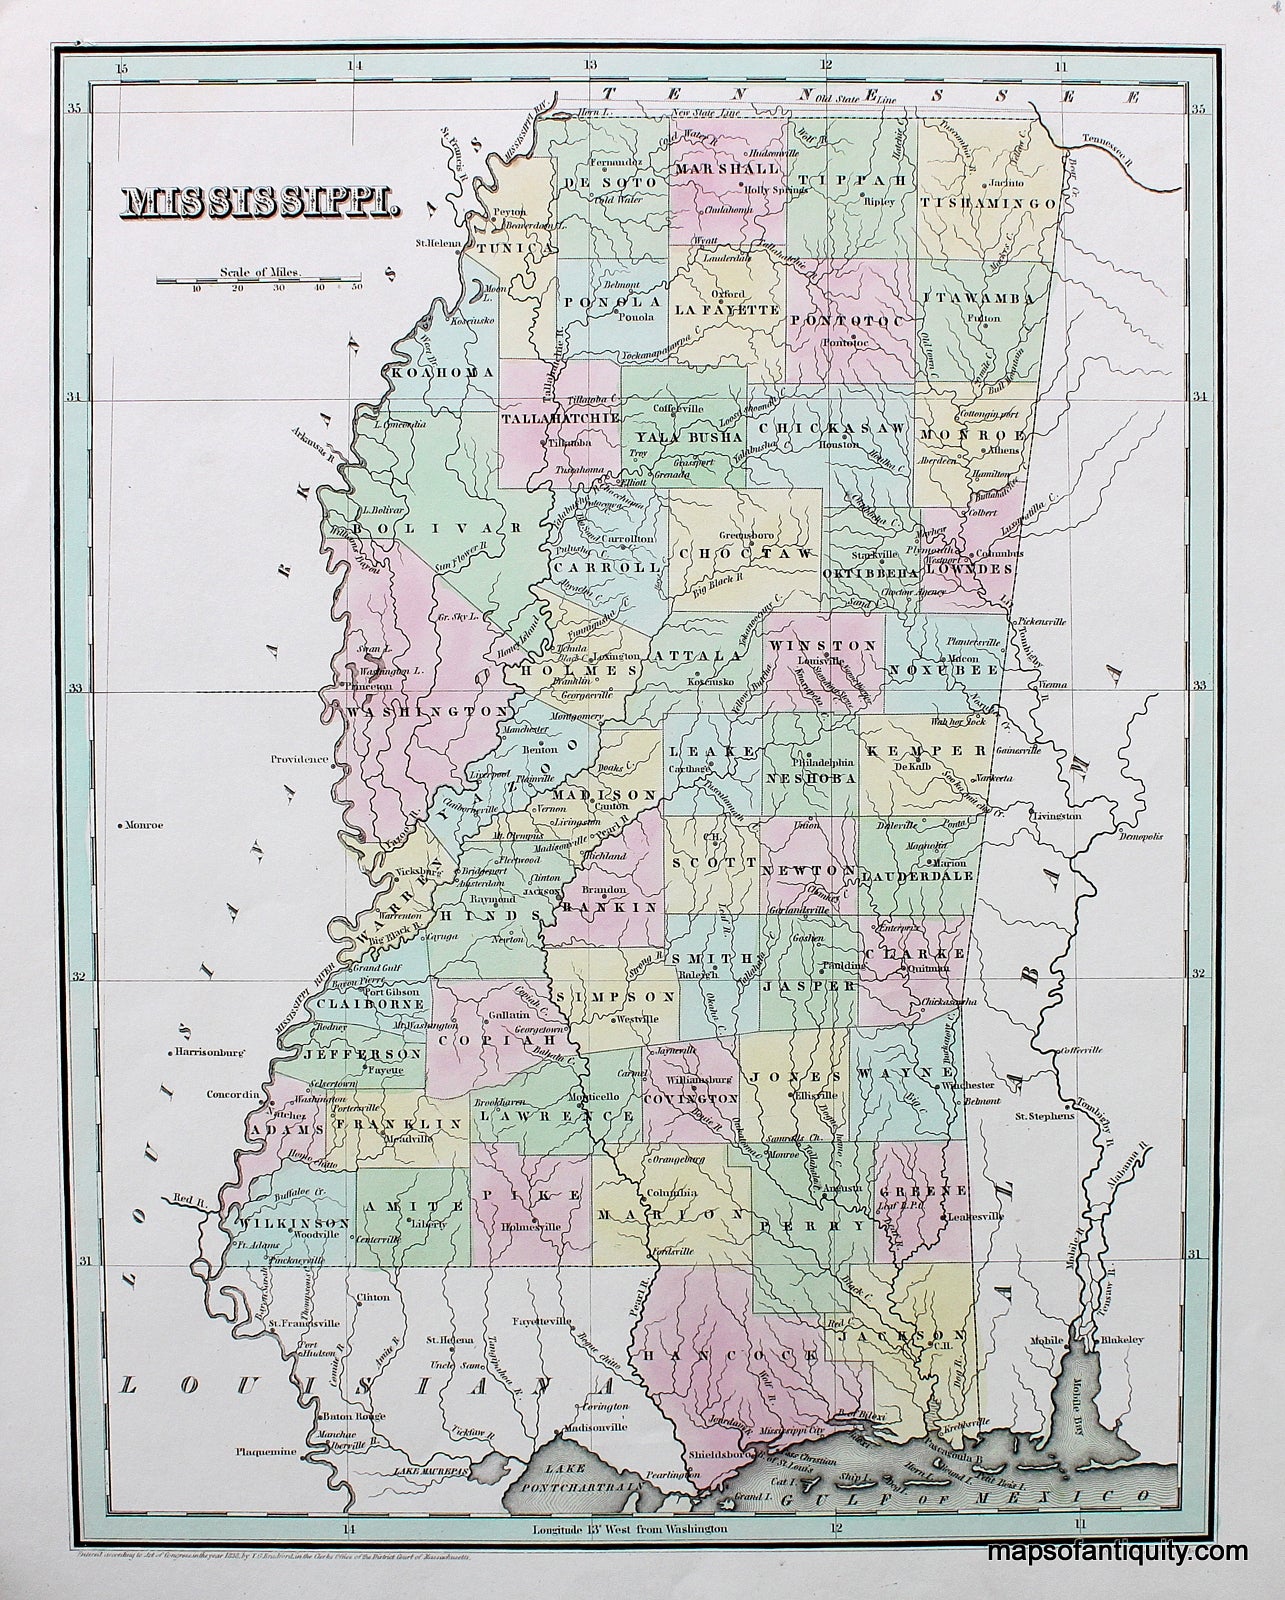 Antique-Hand-Colored-Map-Mississippi.-United-States-South-1838-Bradford-Maps-Of-Antiquity